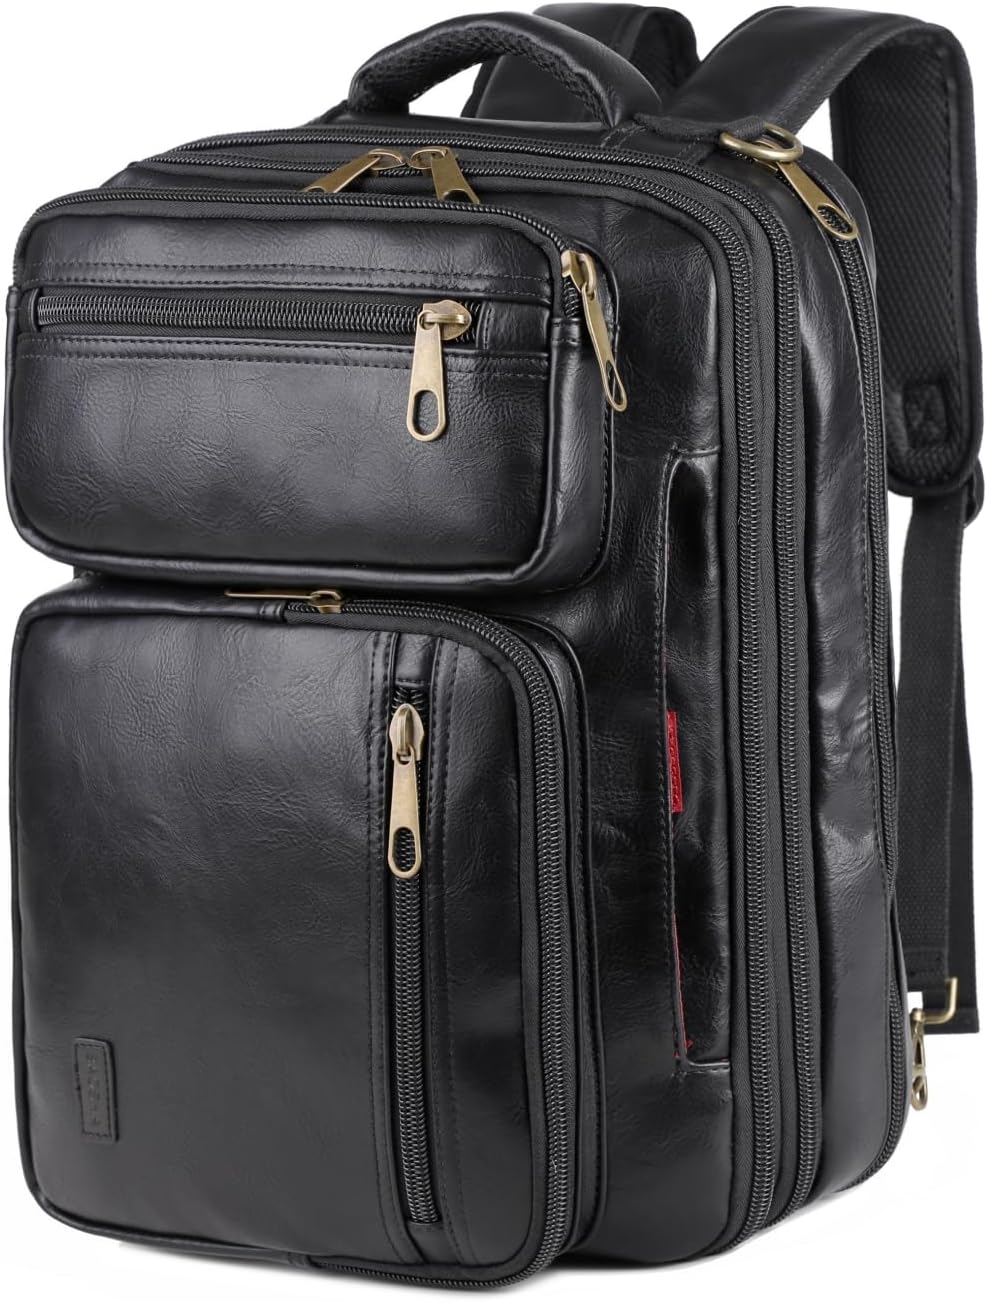 FR Fashion Co. 16" Leather Laptop Backpack Briefcase